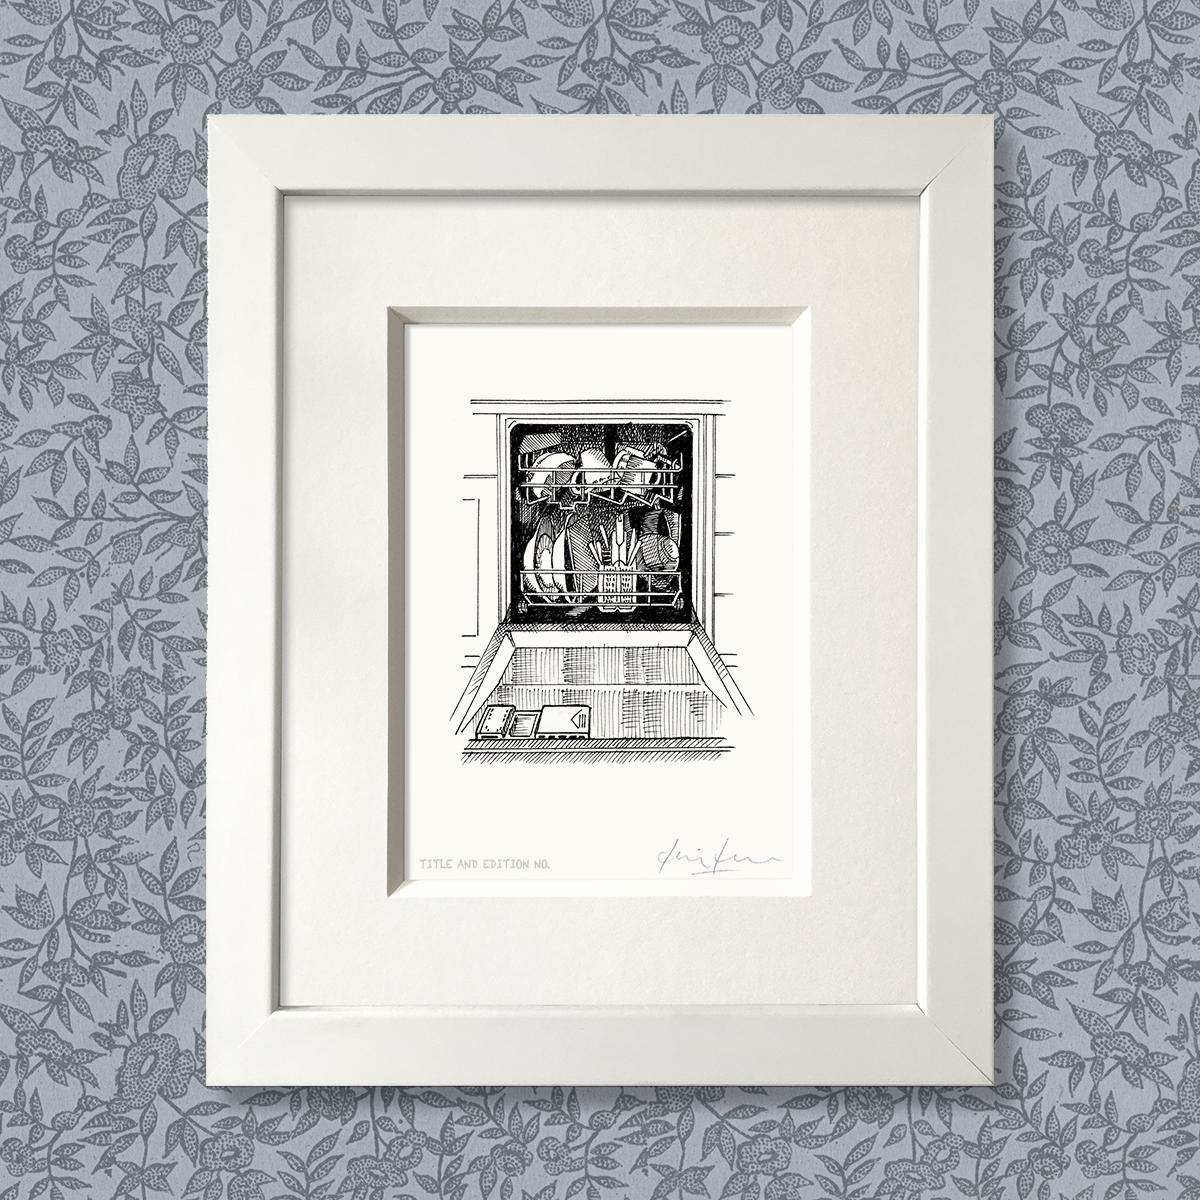 Limited edition print from pen and ink drawing of the inside of a dishwasher in a white frame